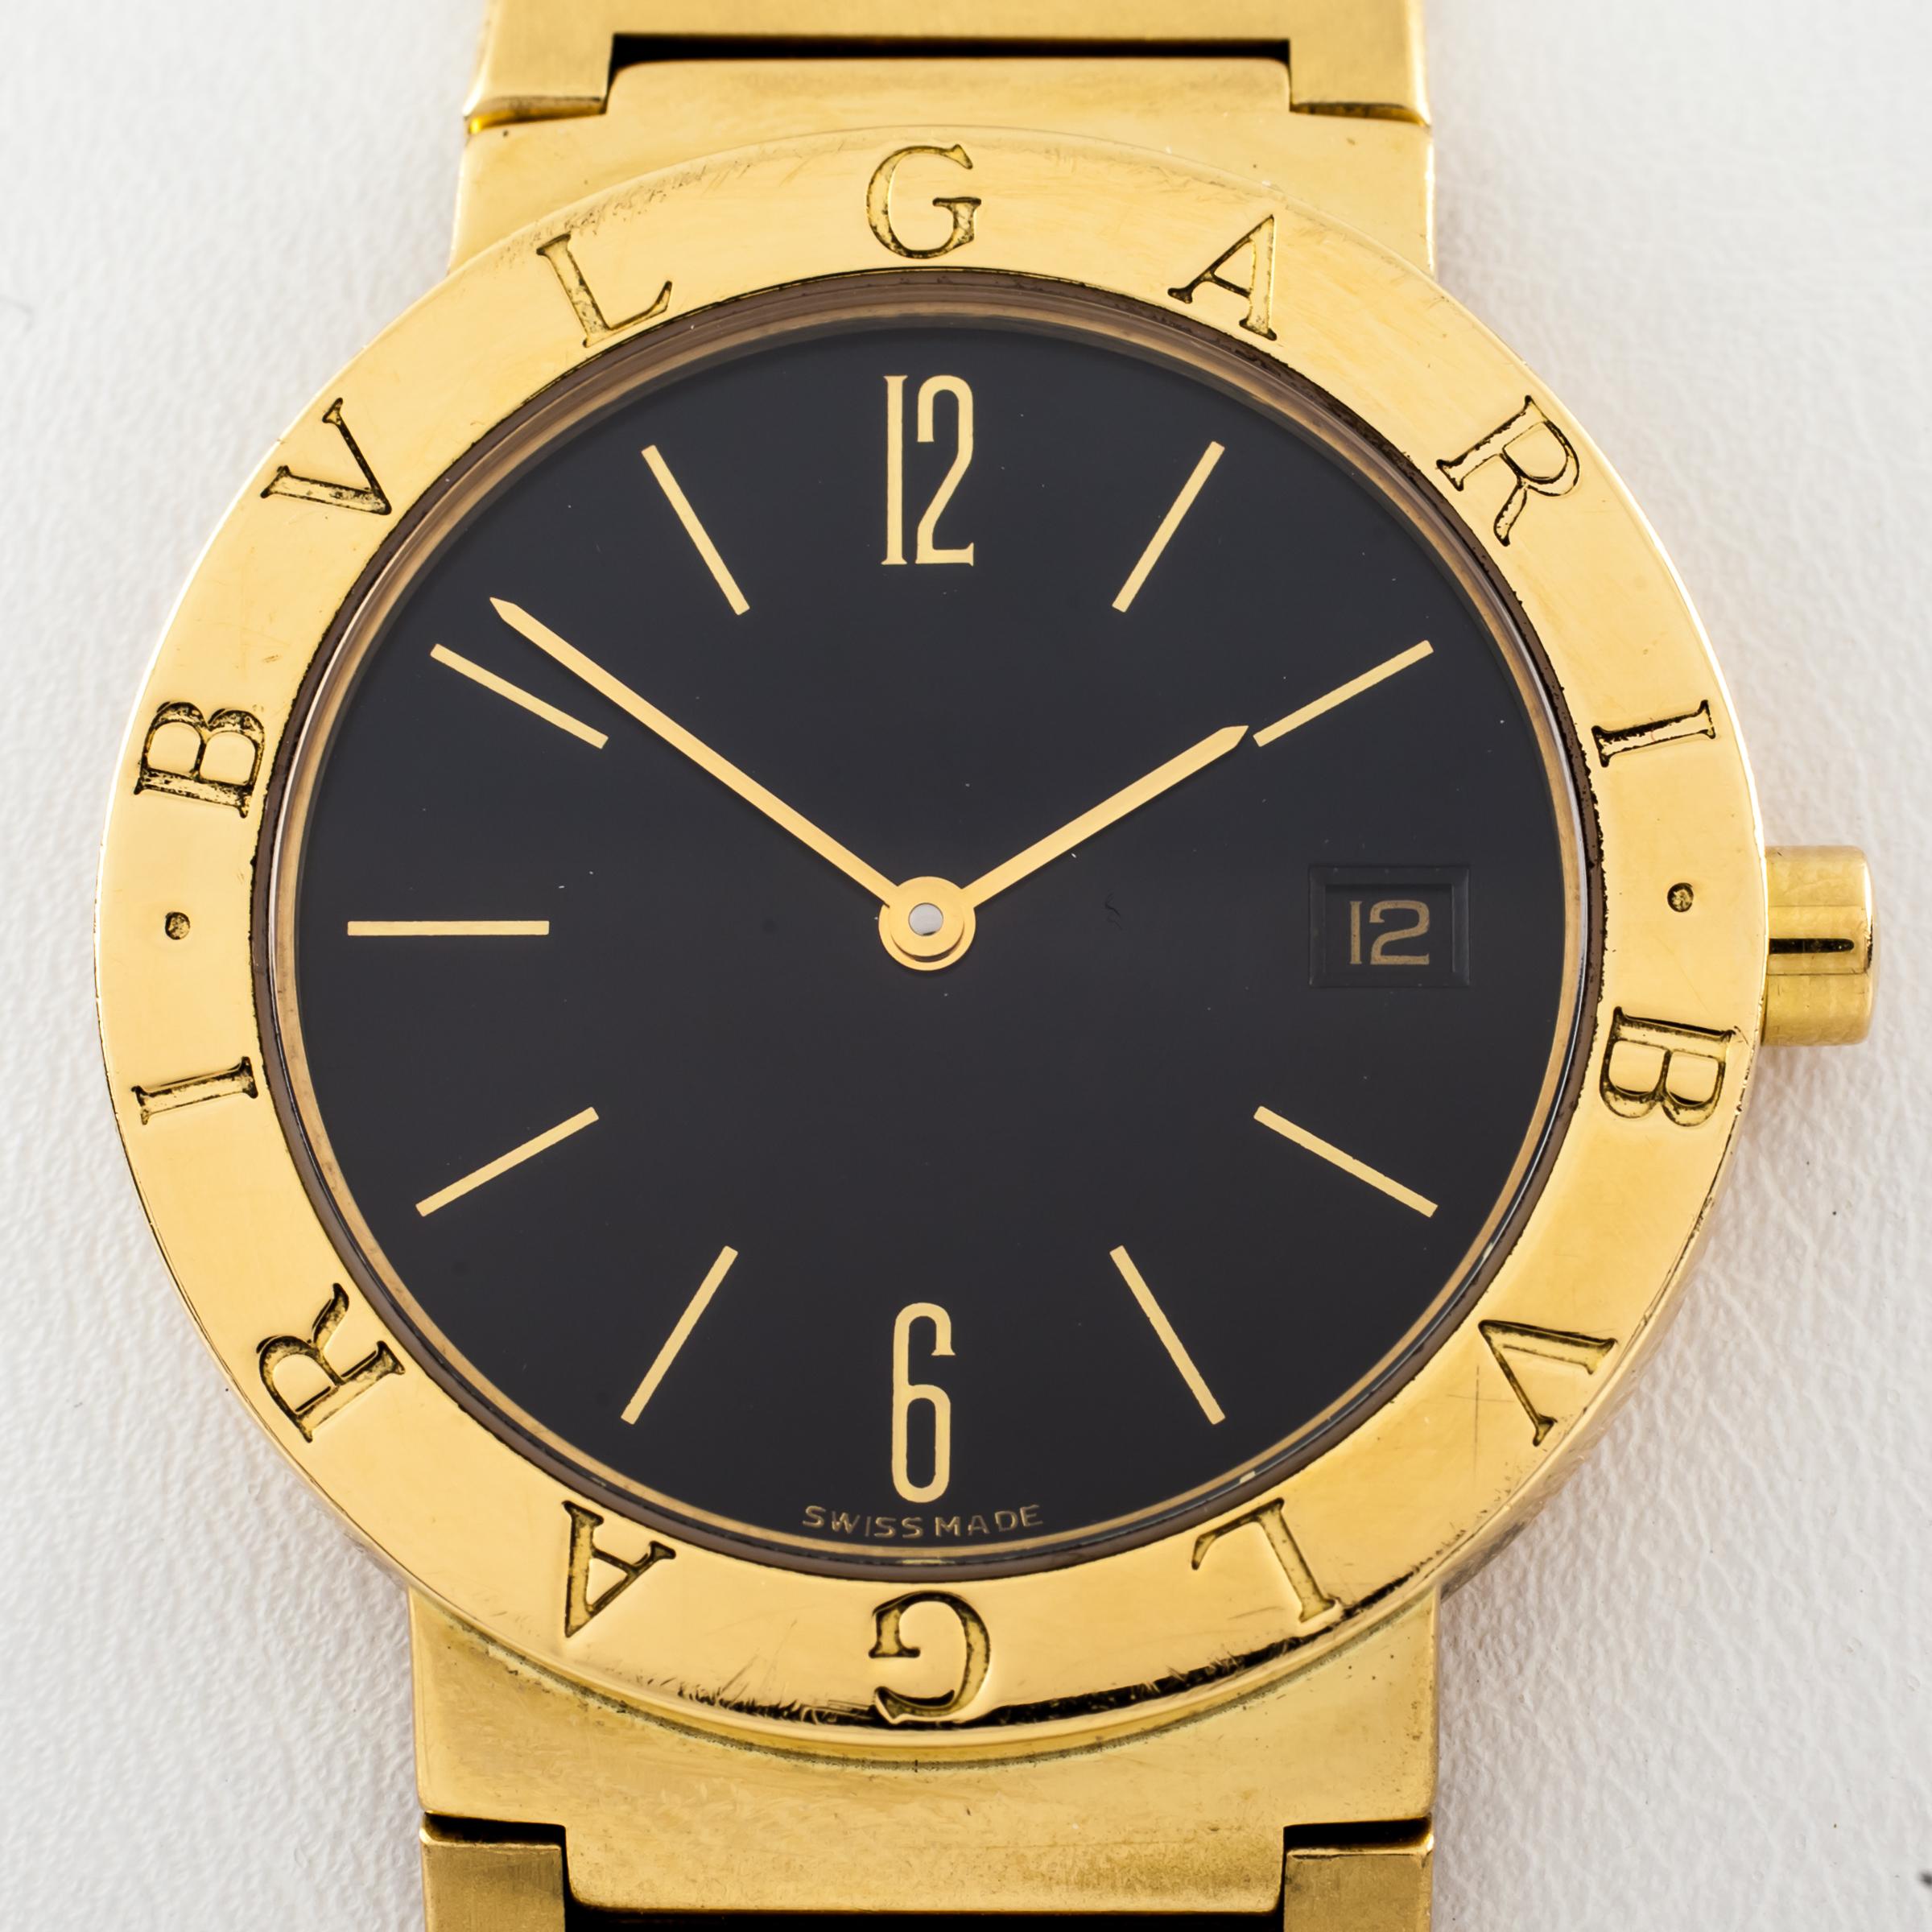 Model #BB 33 GGD
18k Yellow Gold Case
33 mm in Diameter (36 mm w/ Crown)
Lug-to-Lug Distance = 14 mm
Lug-to-Lug Length = 39 mm
Thickness = 6 mm
Black Dial w/ Gold Numbers, Tic Marks, and Hands (M + H)
Includes Date Feature at 3:00
26 mm in